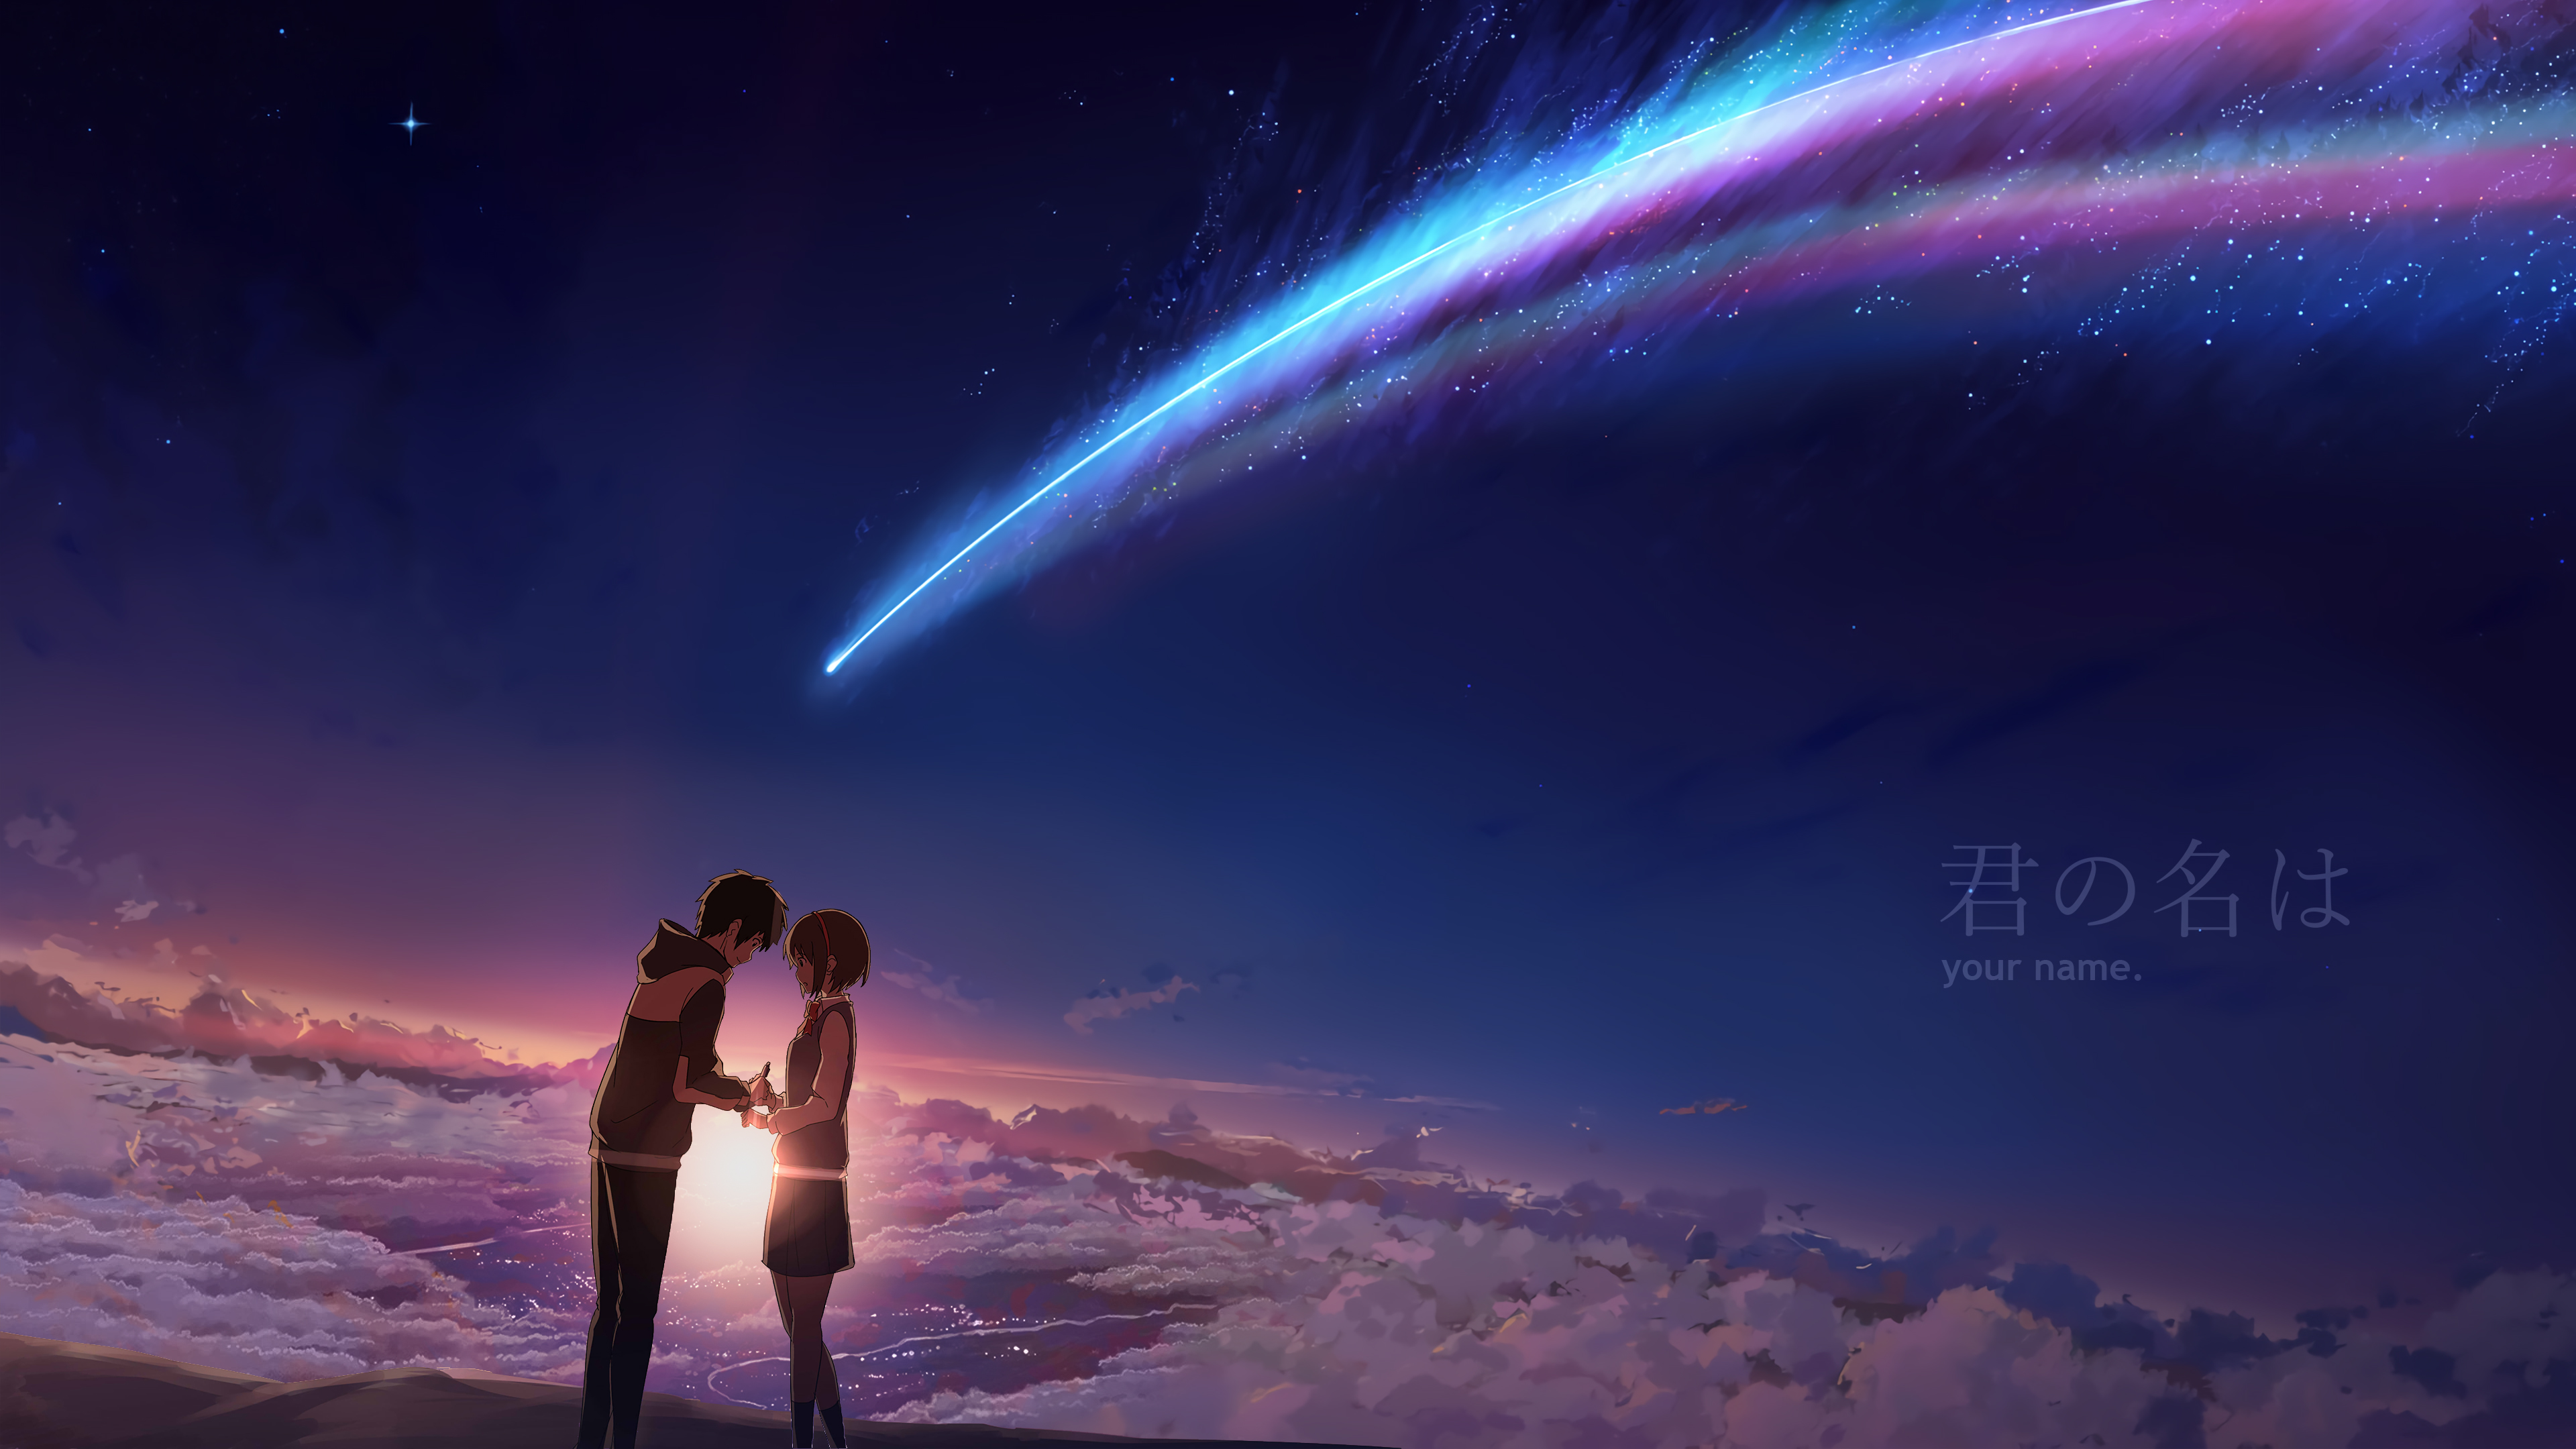 Kimi No Na Wa: Love that defies the confines of time and space